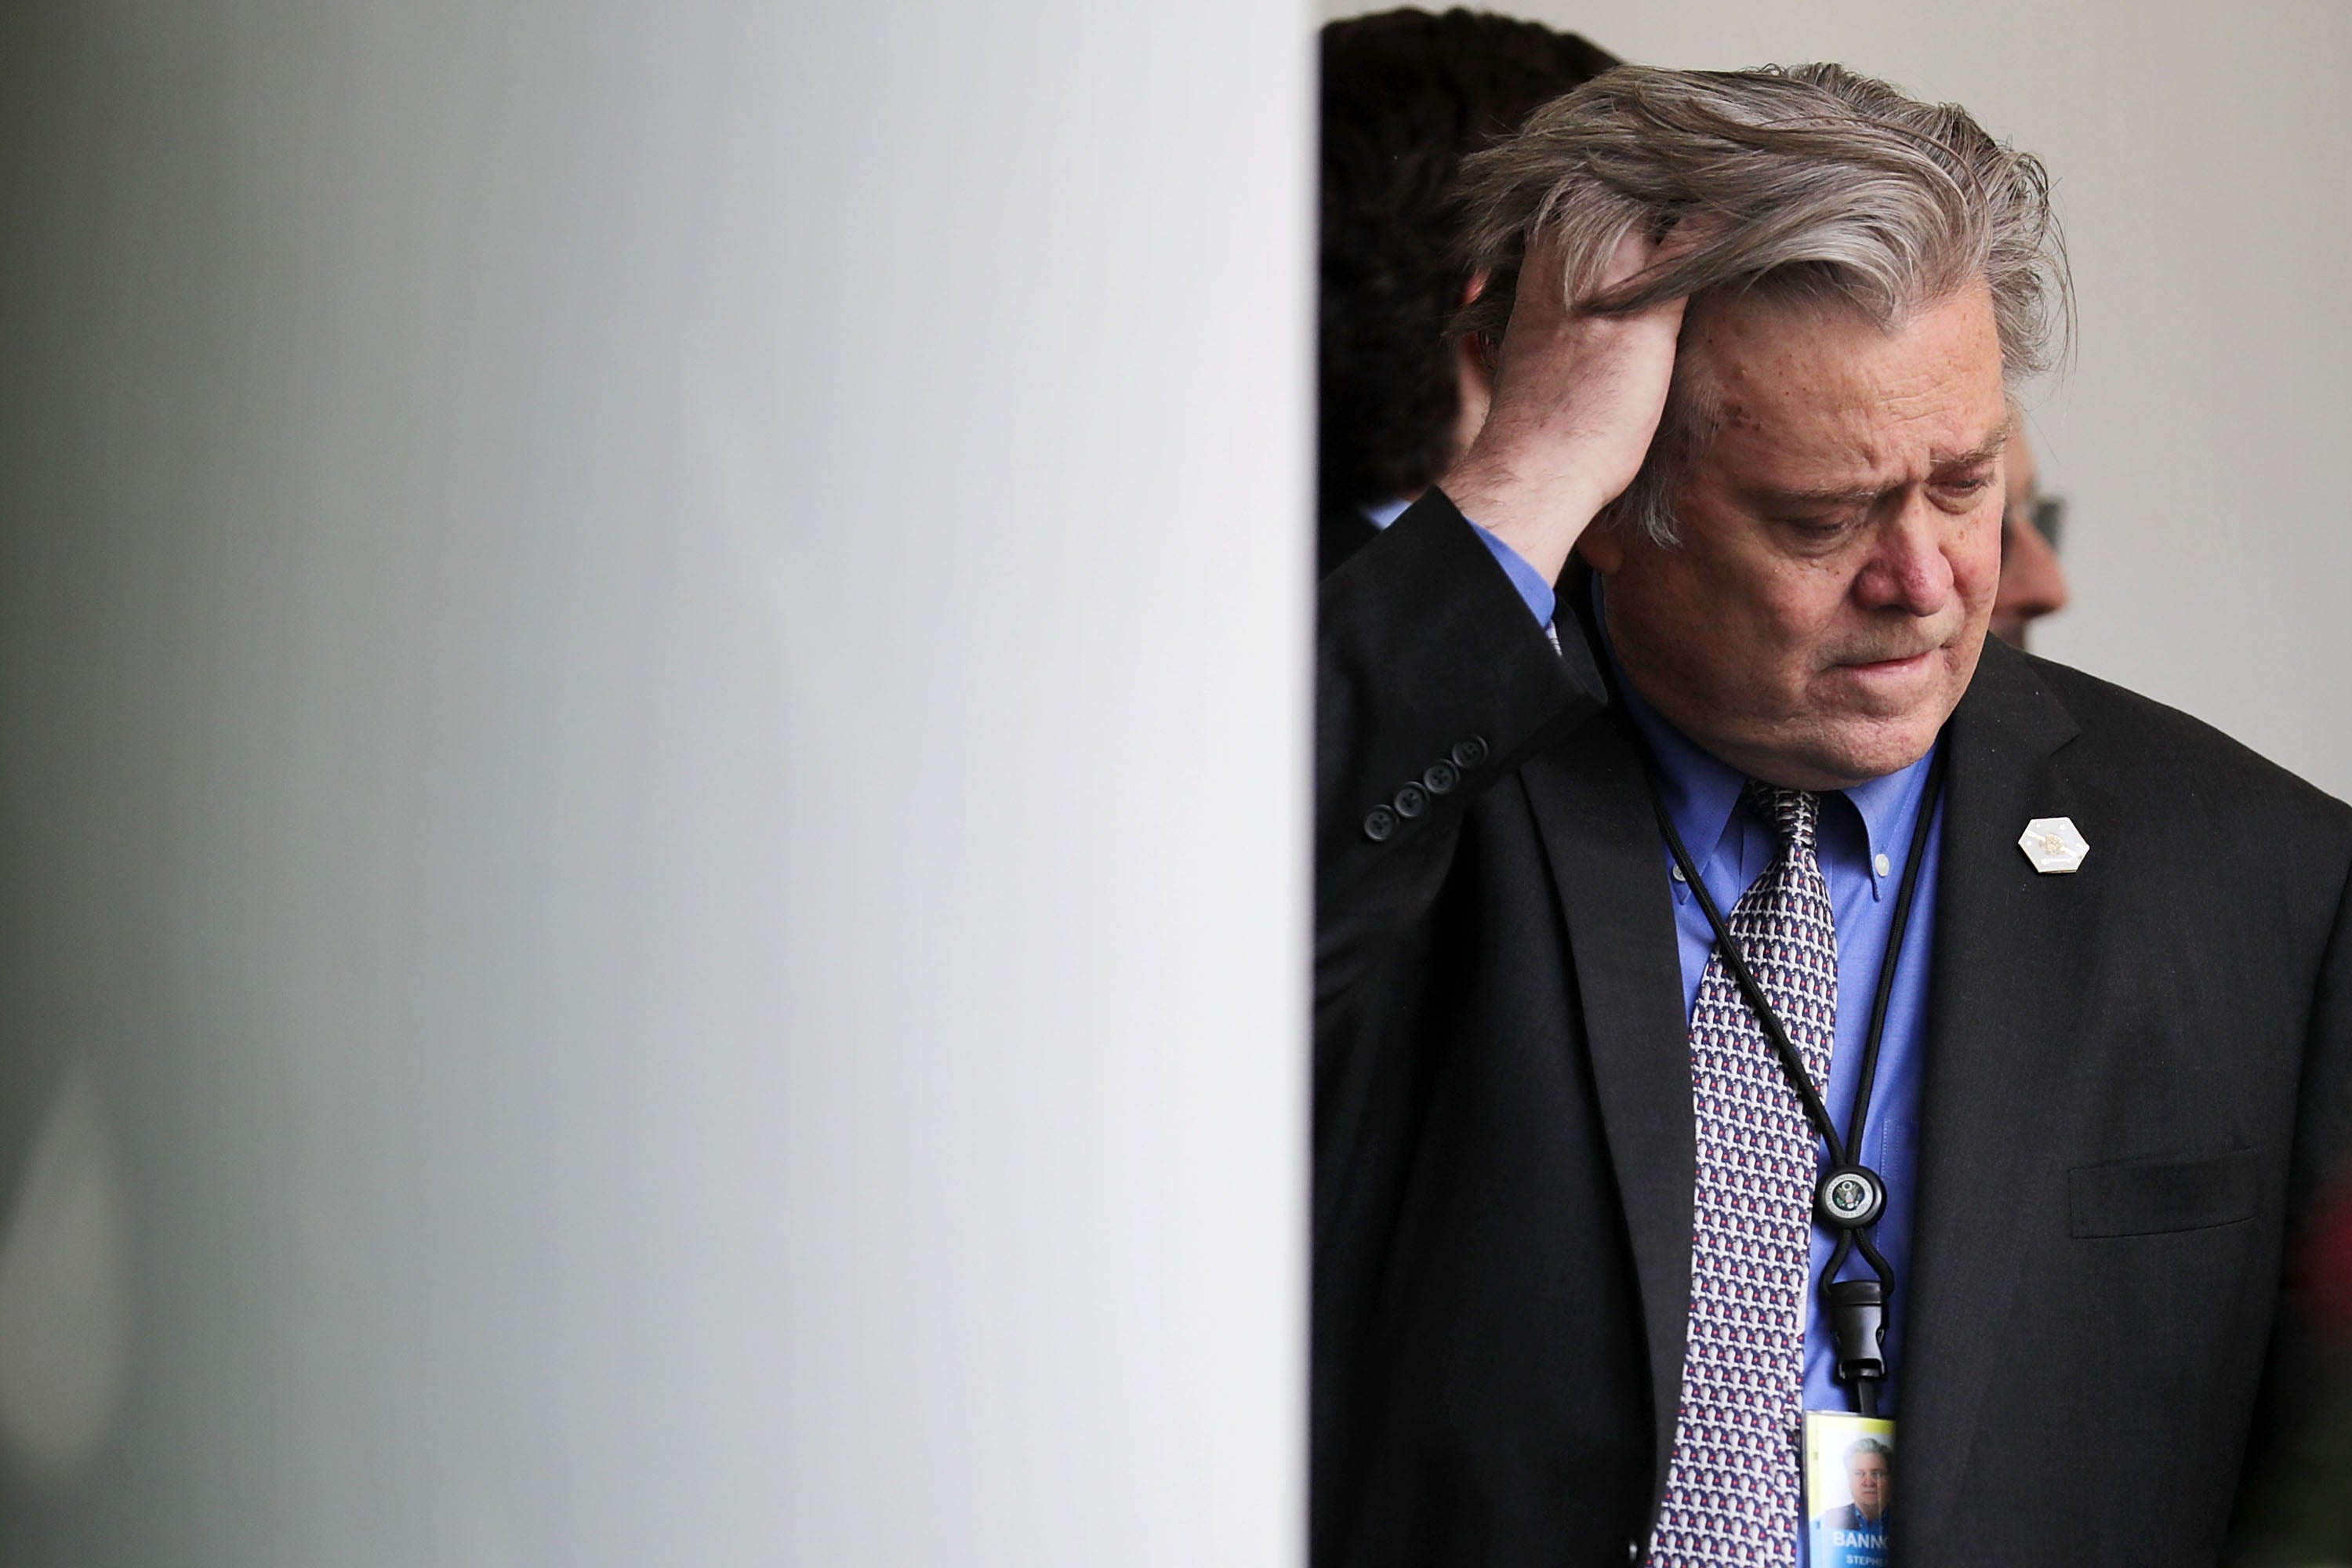 Steve Bannon, Trump Adviser With White Nationalist Ties, Is Out At White House
